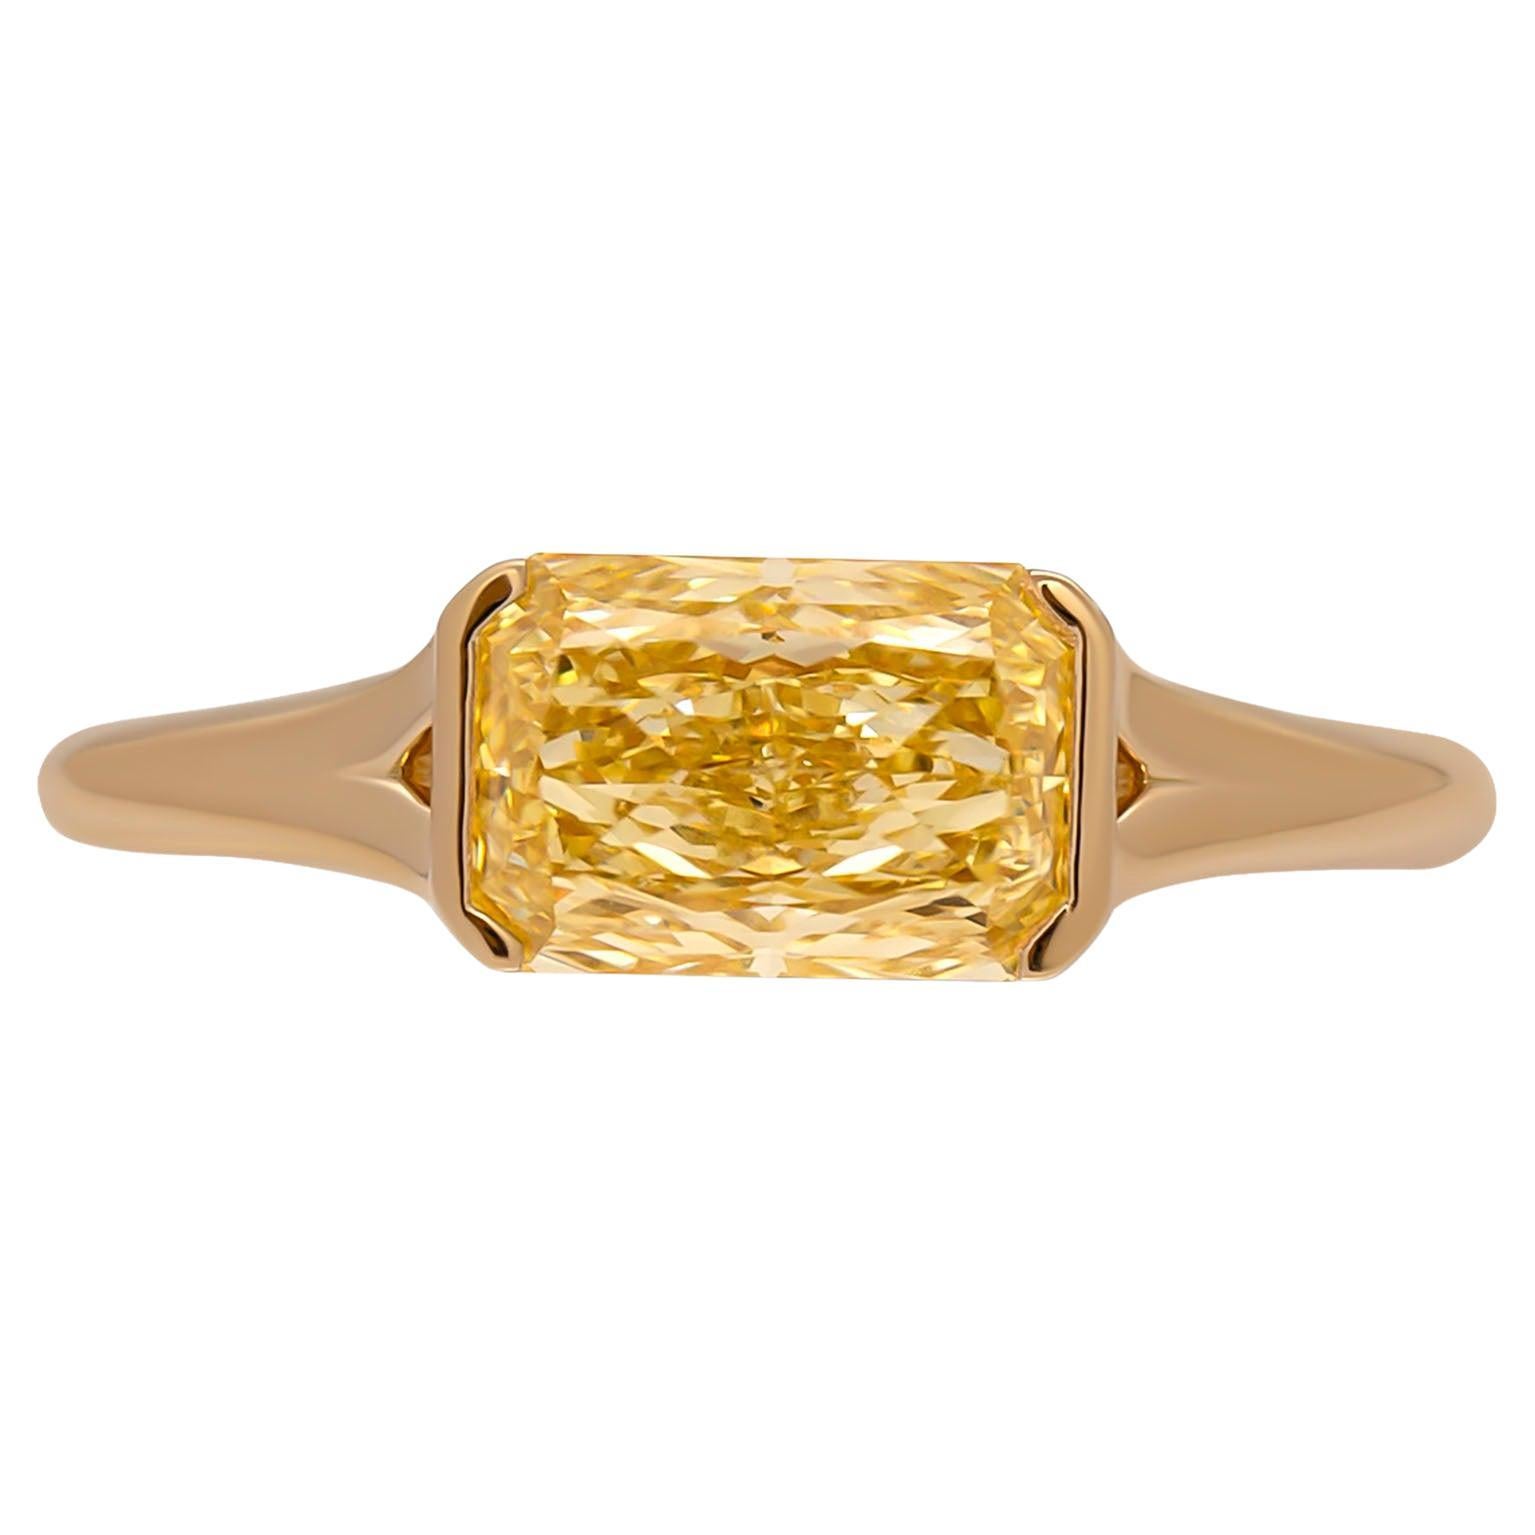  Engagement ring in 18K Yellow 
Center 1.55ct Natural Fancy Yellow Even Flawless Radiant Shape Diamond GIA#6224112864 
Size: 6
East West Design with European shank